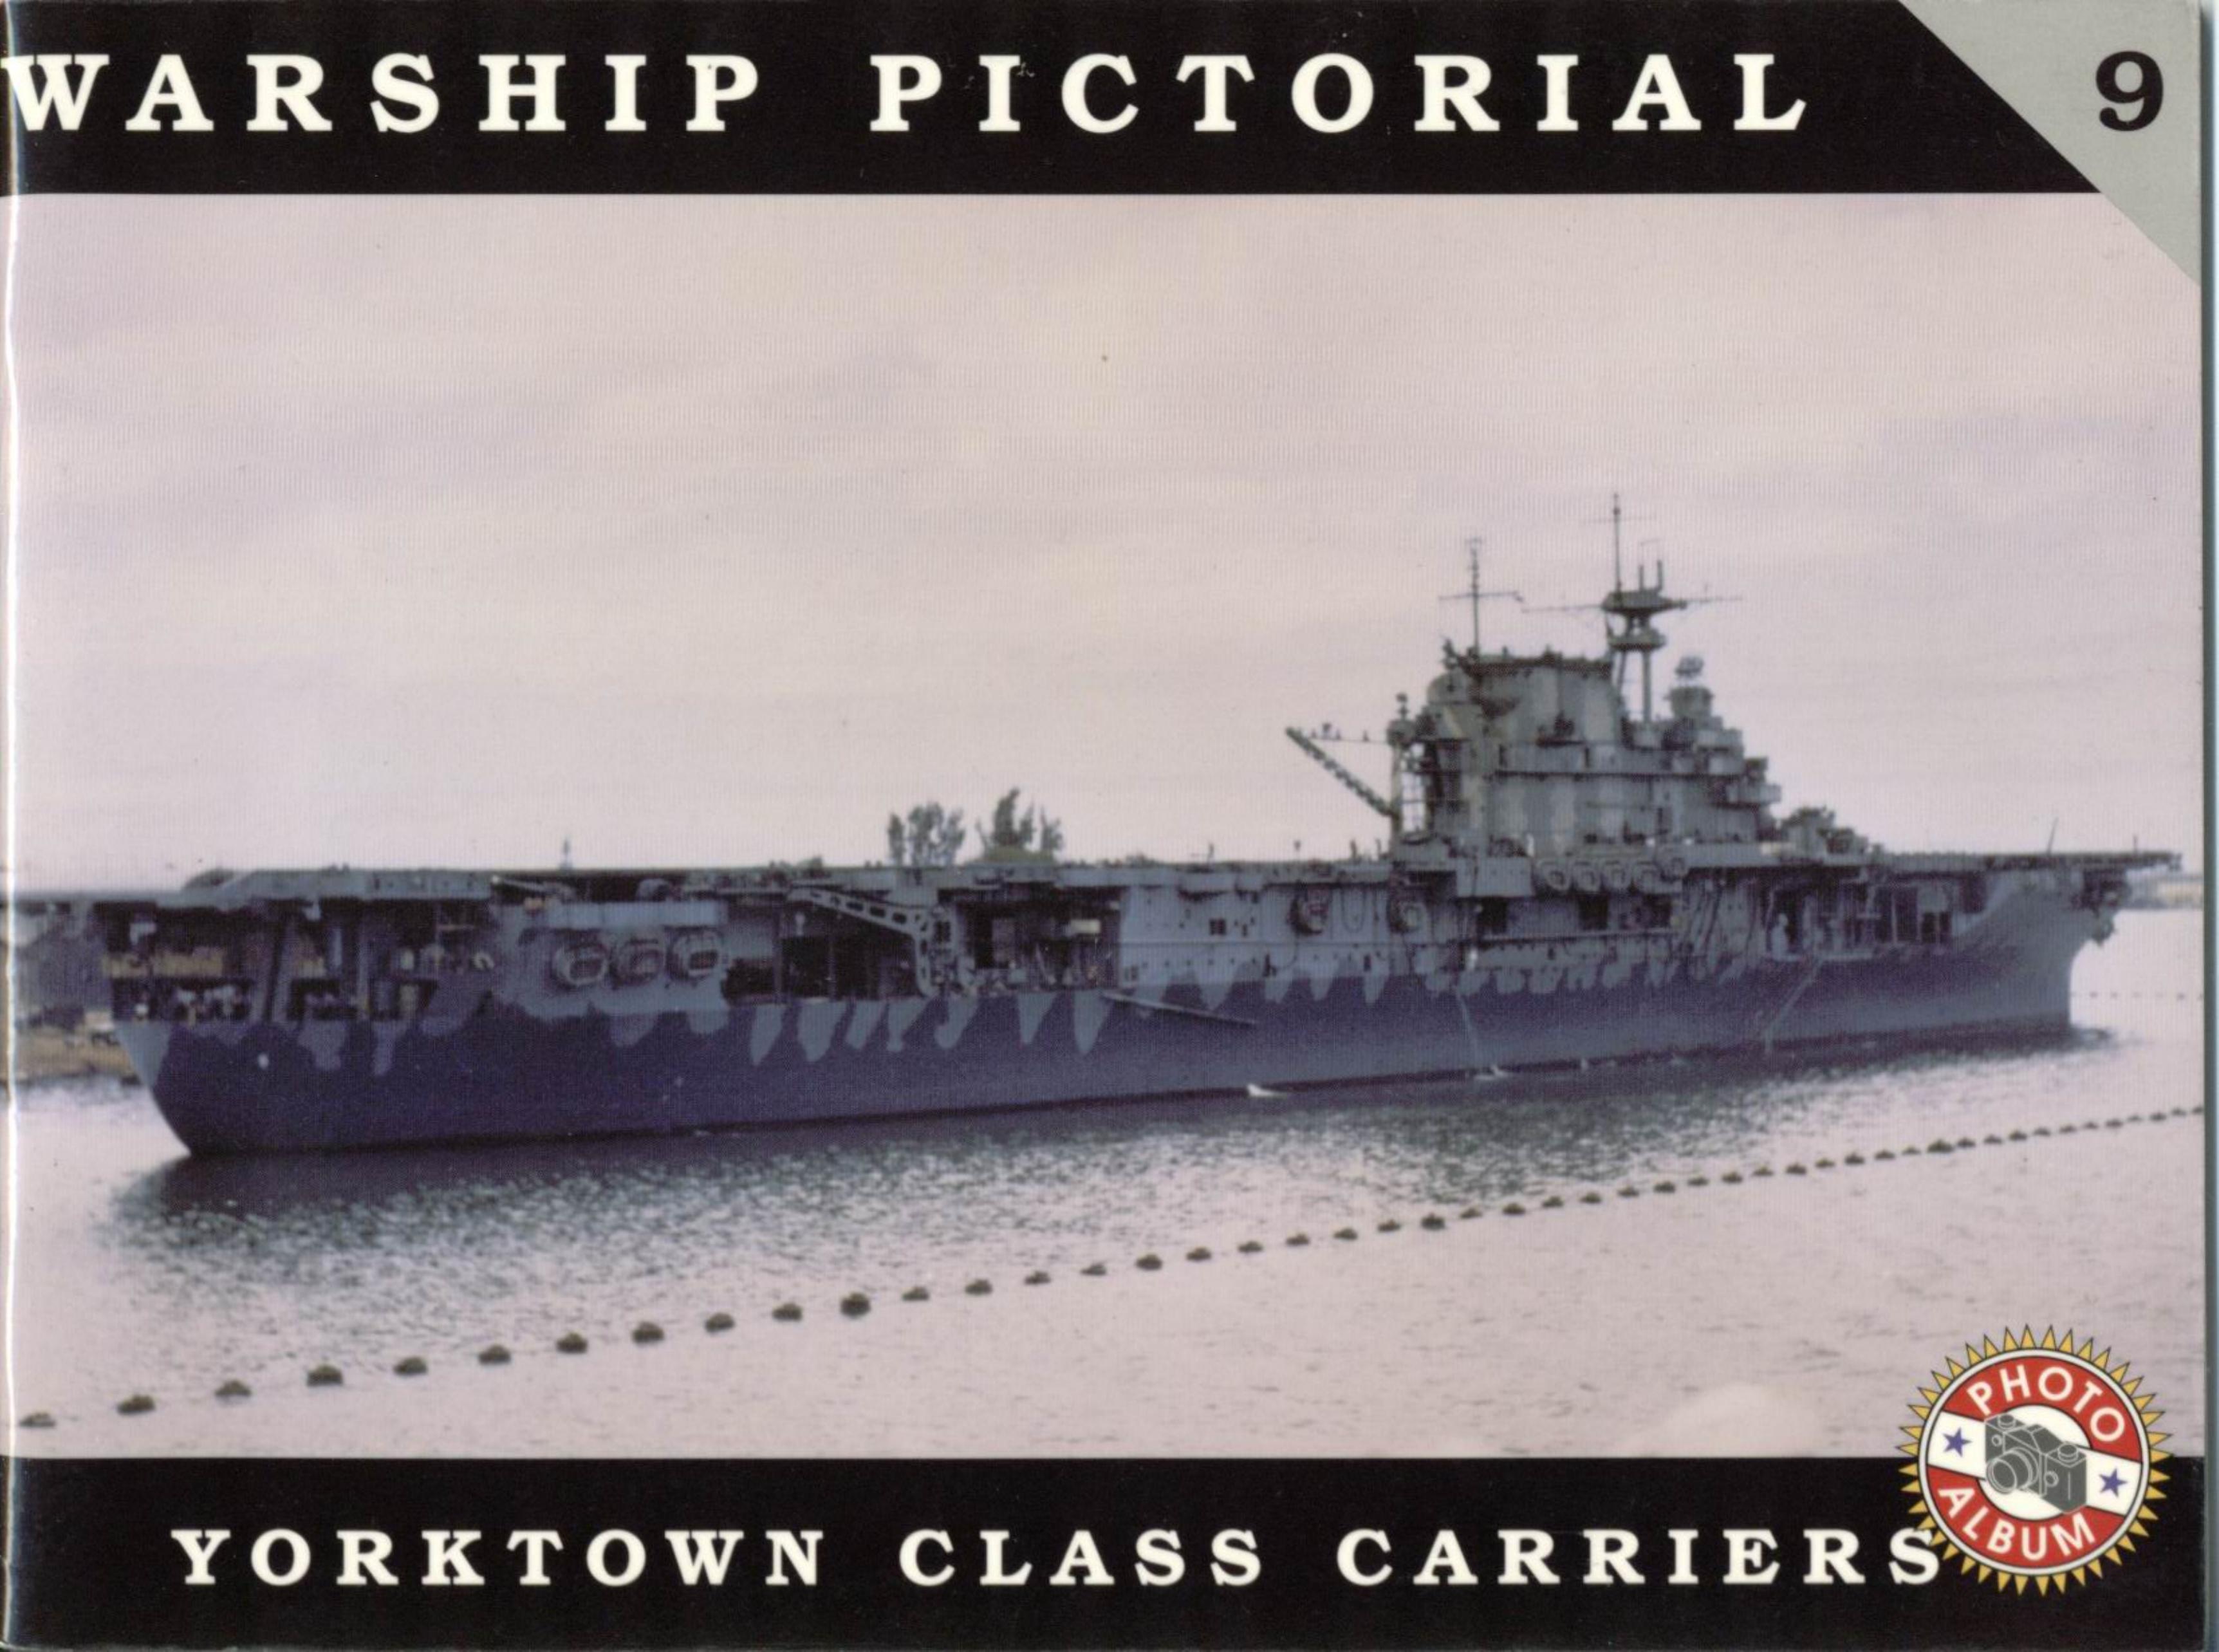 Yorktown Class Carriers by Warship Pictorial 9